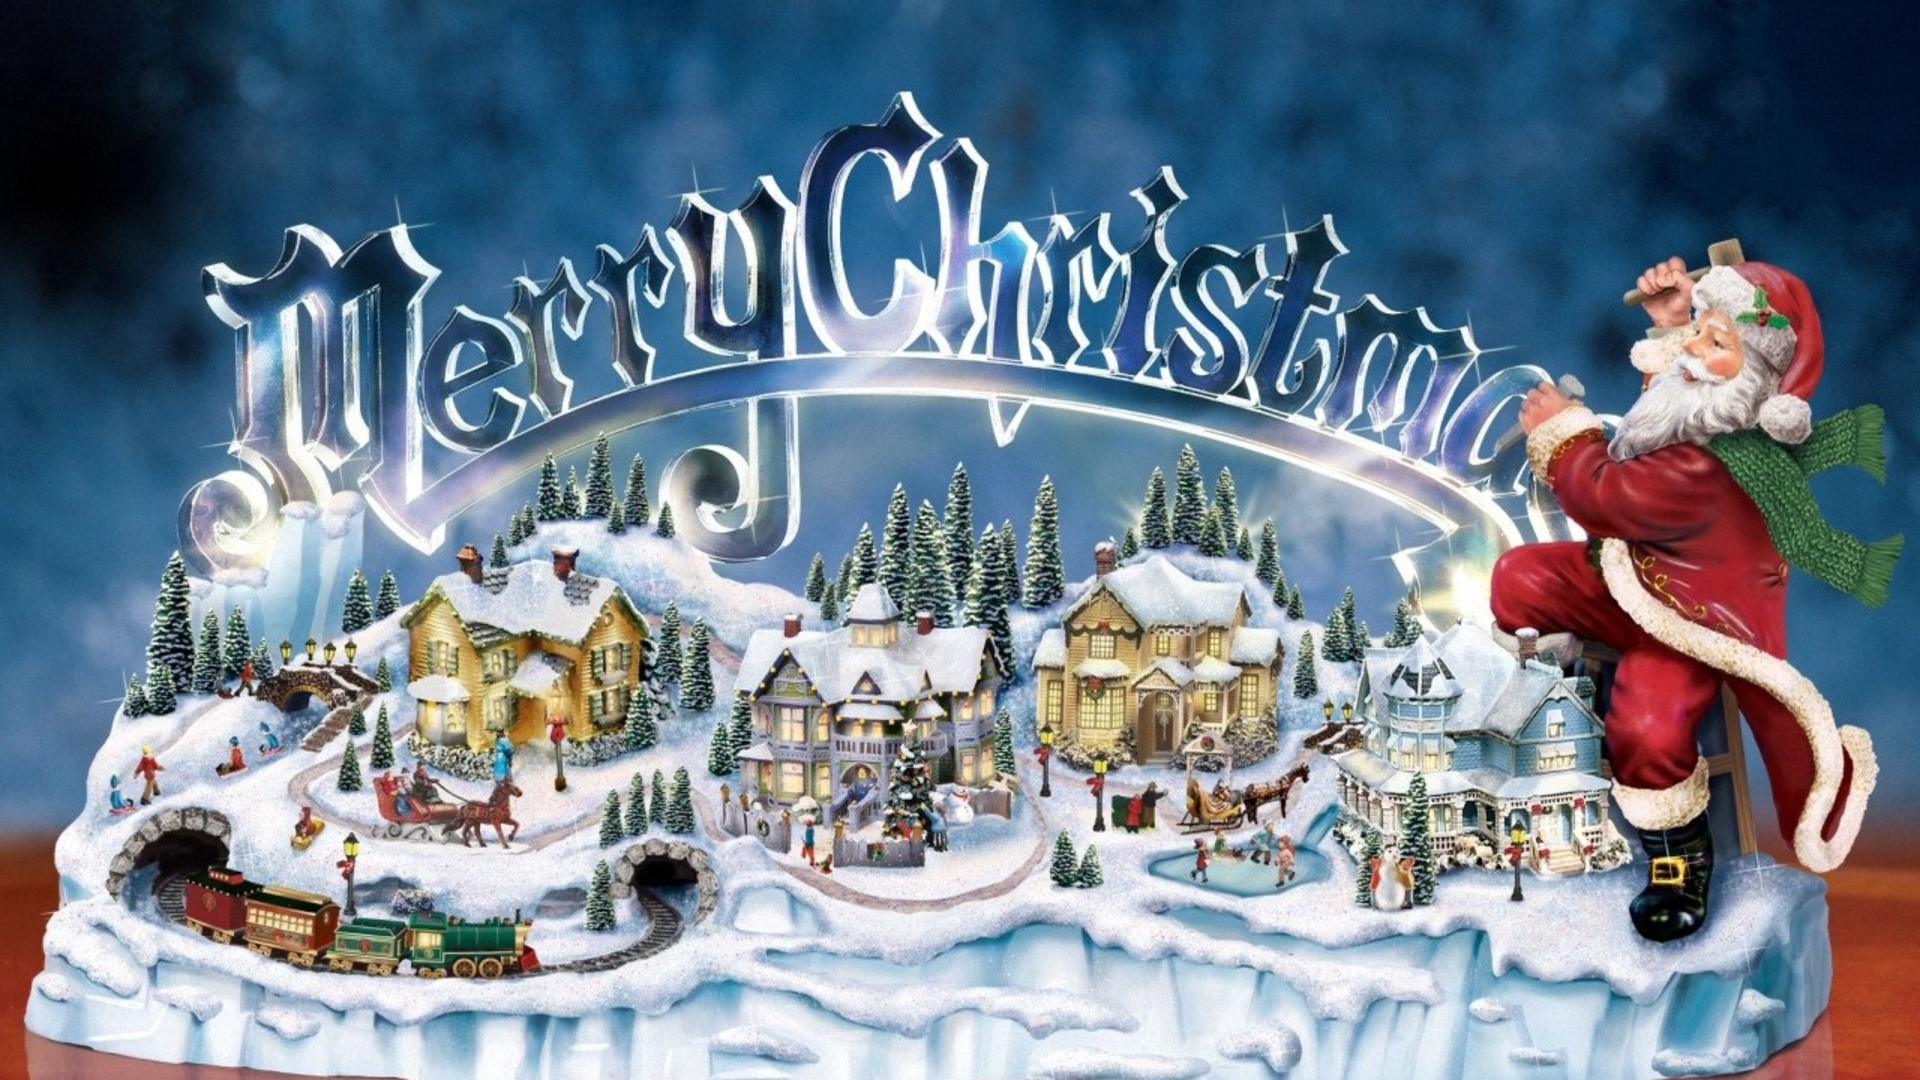 Merry Christmas 2014 HD Wallpapers 3d Gif Animated Images, Pics Free